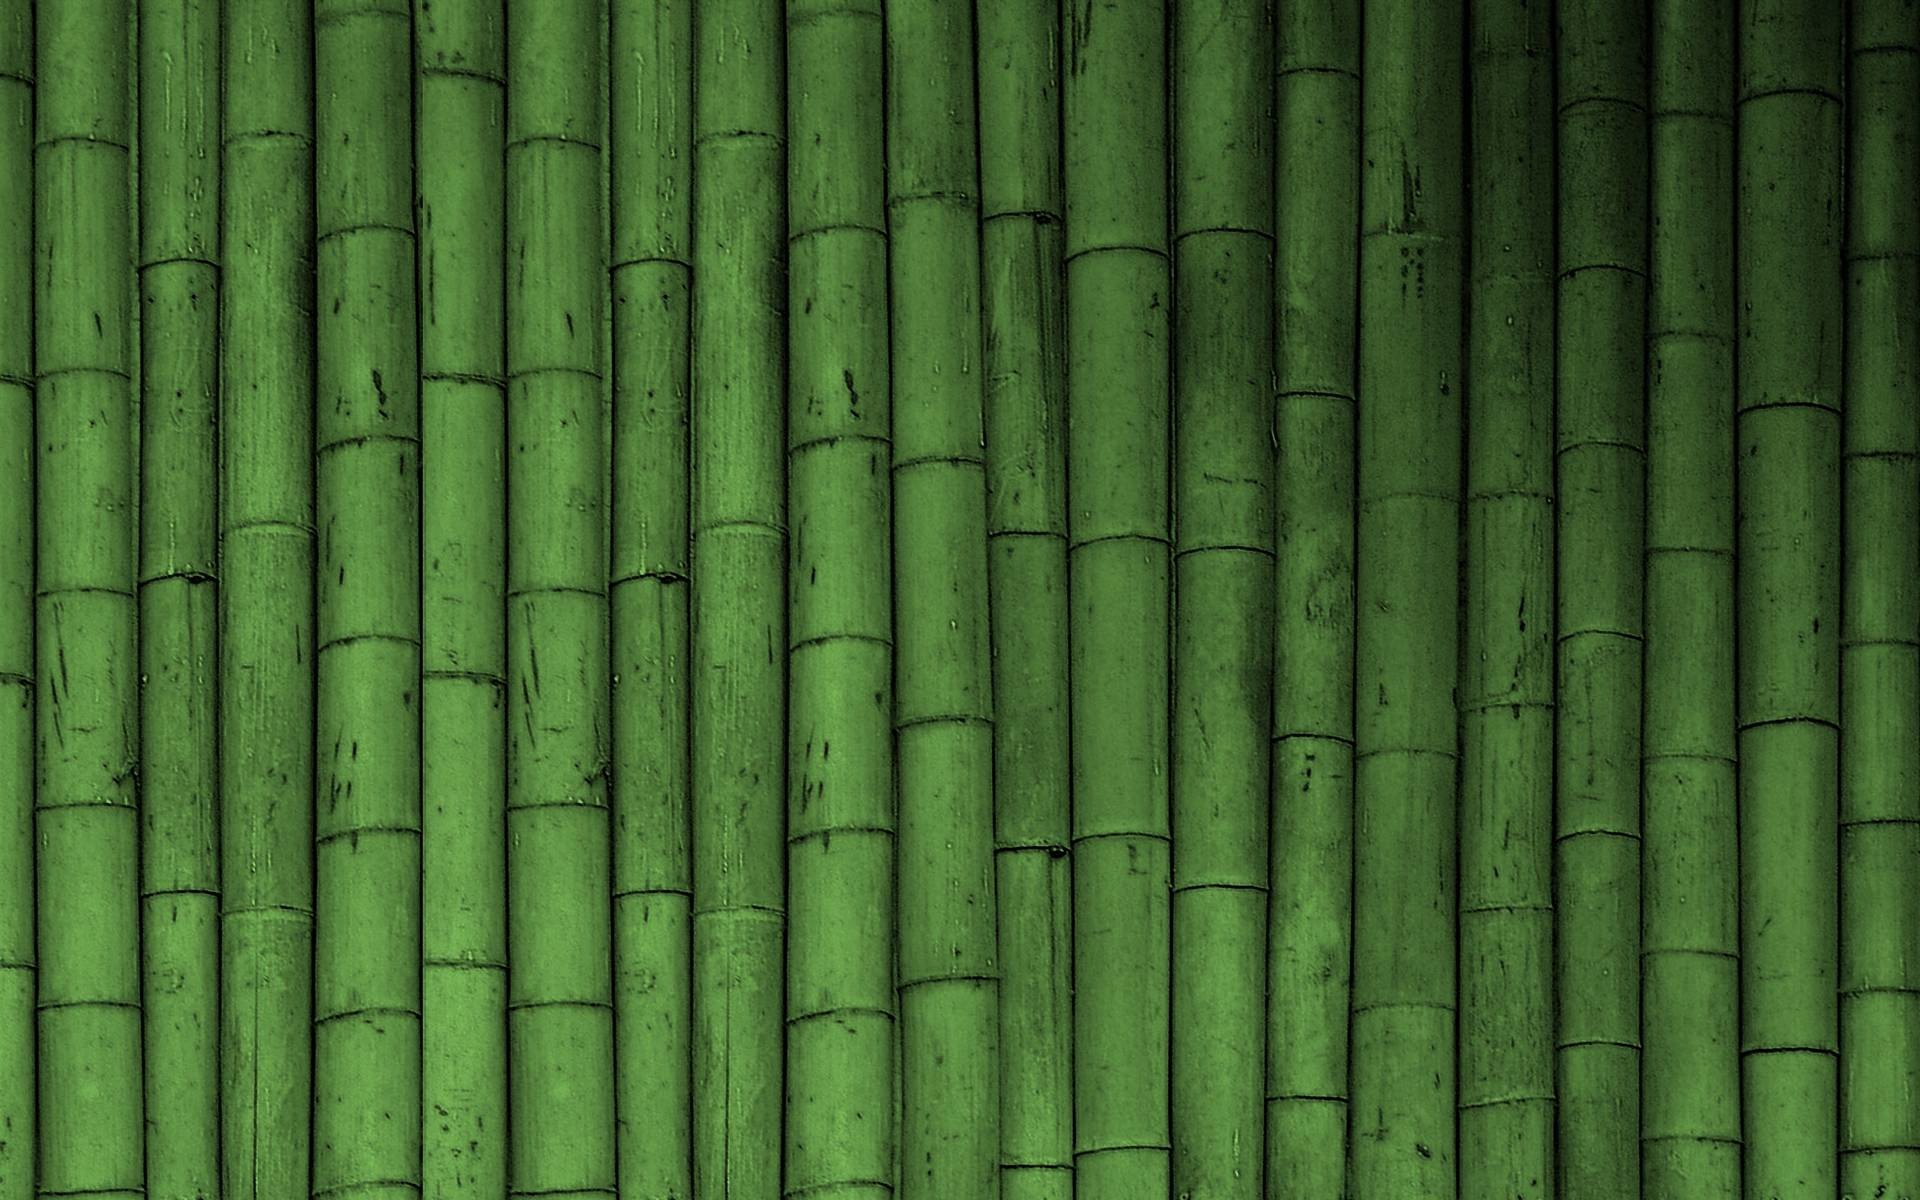 1920x1200 HD Bamboo Wallpapers Download Free 1280Ã800 Bamboo Wallpaper (38 Wallpapers)  | Adorable